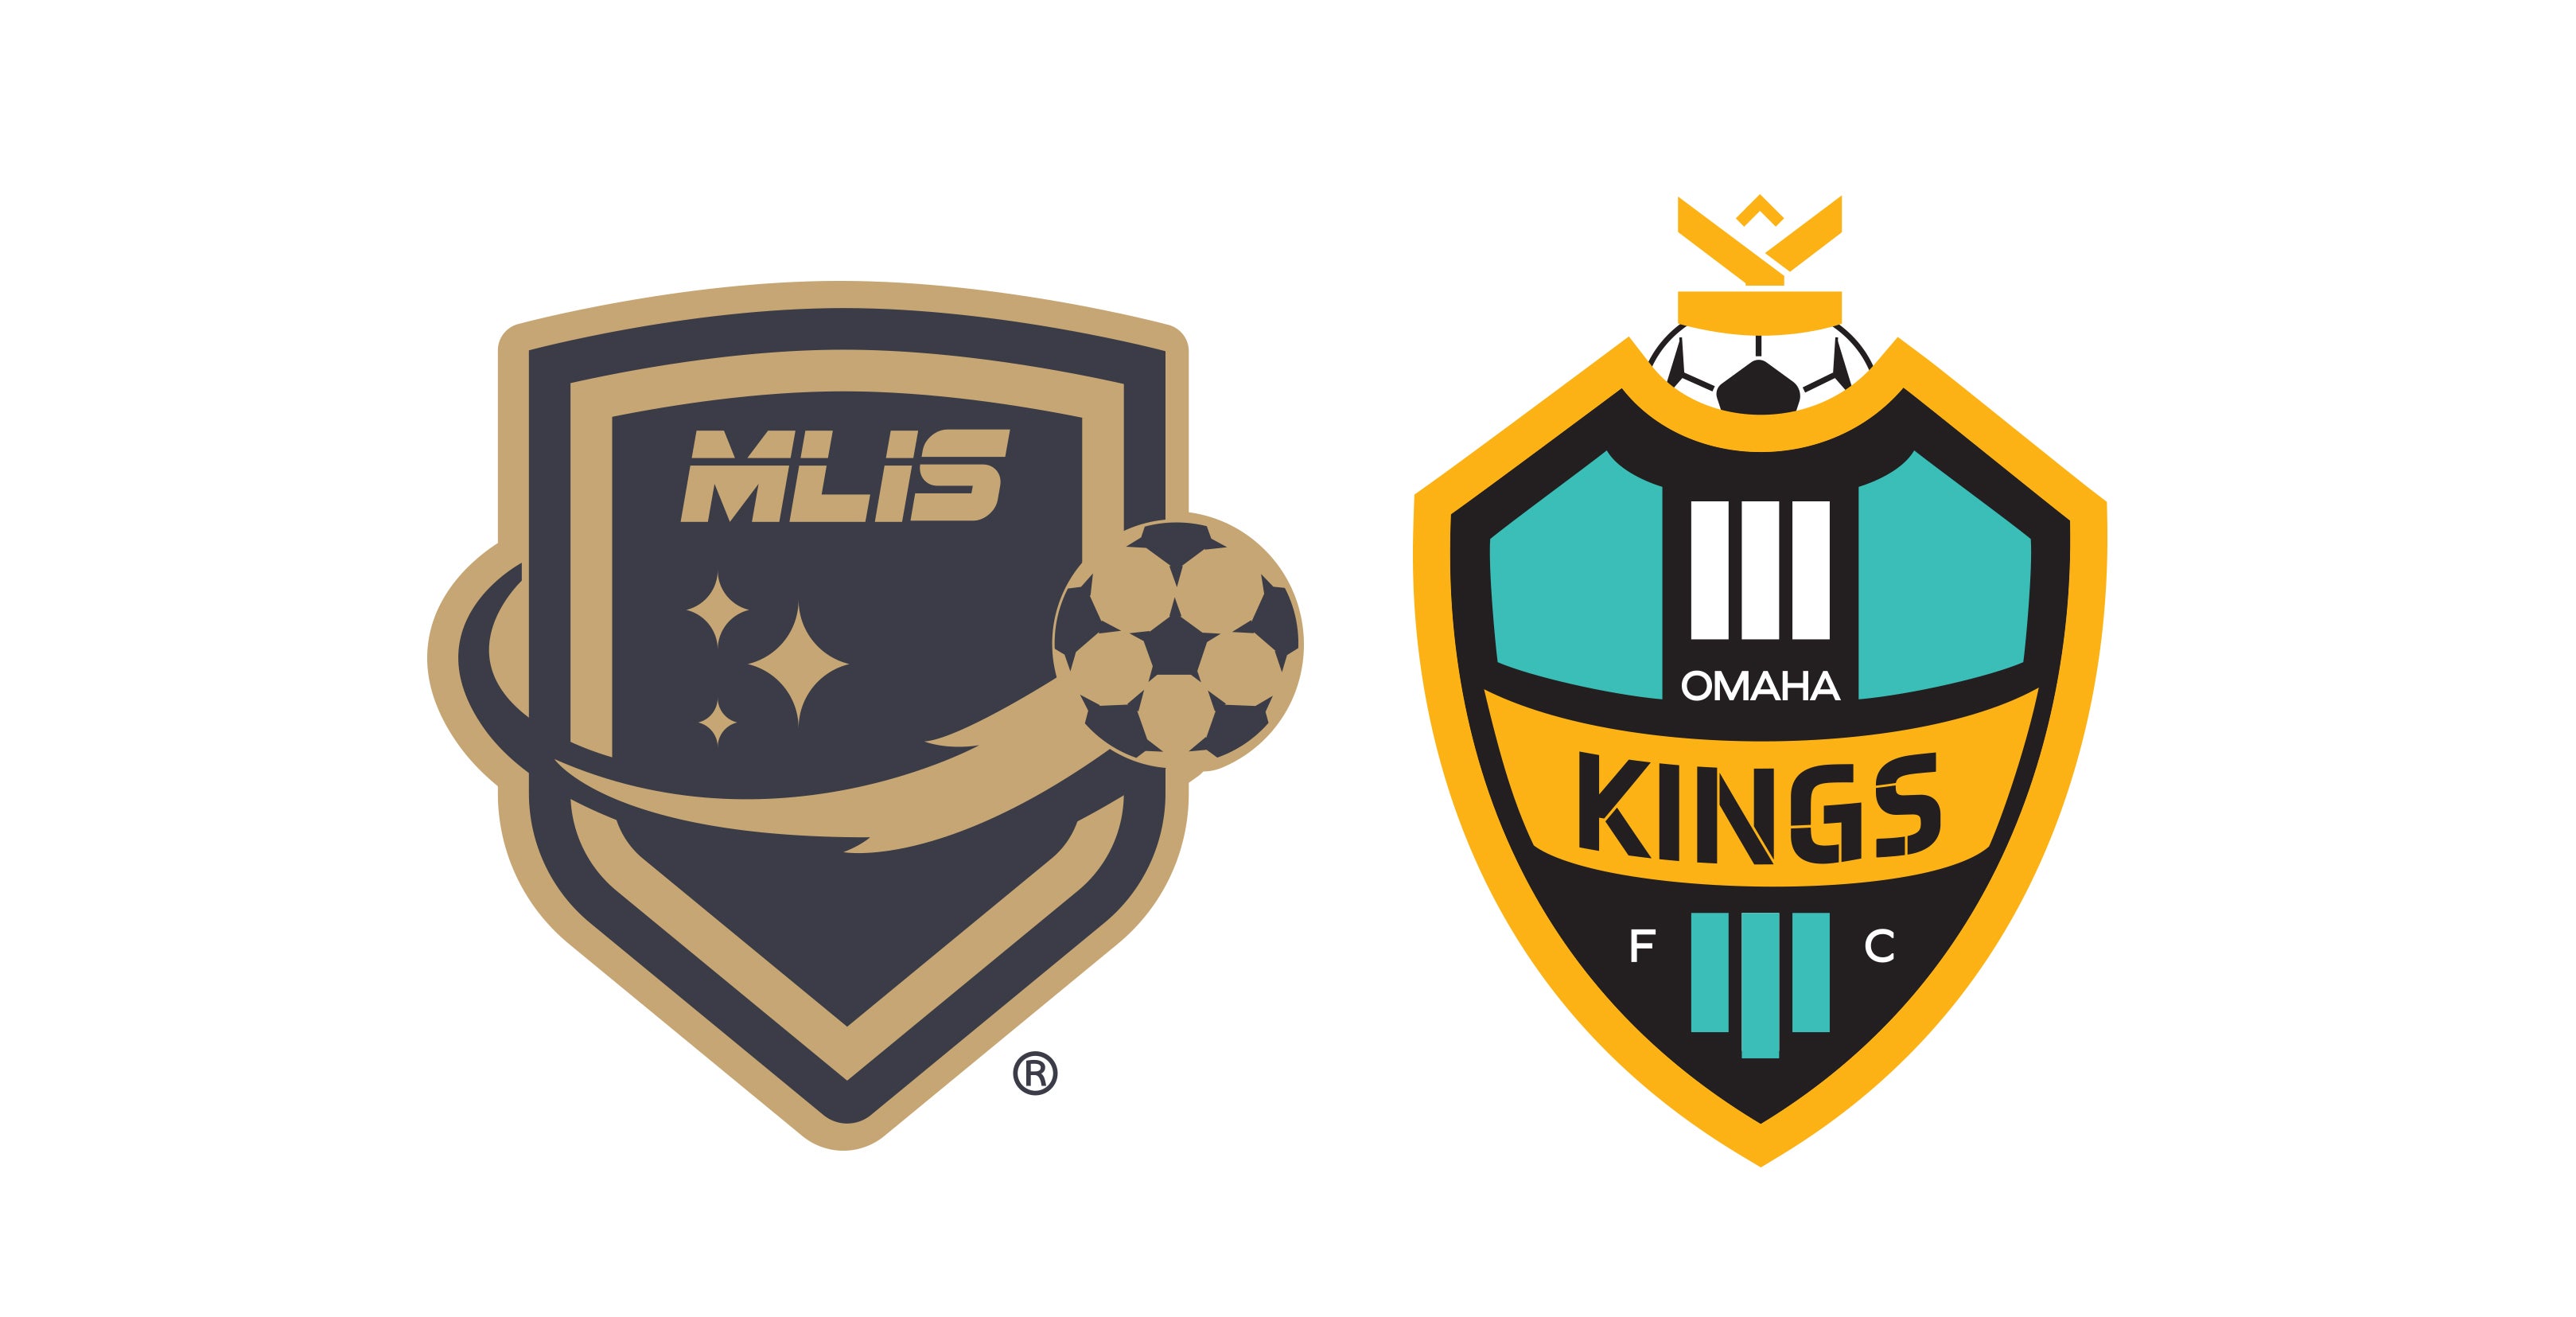 Mlis League Finals Hosted By Omaha Kings Fc at Baxter Arena